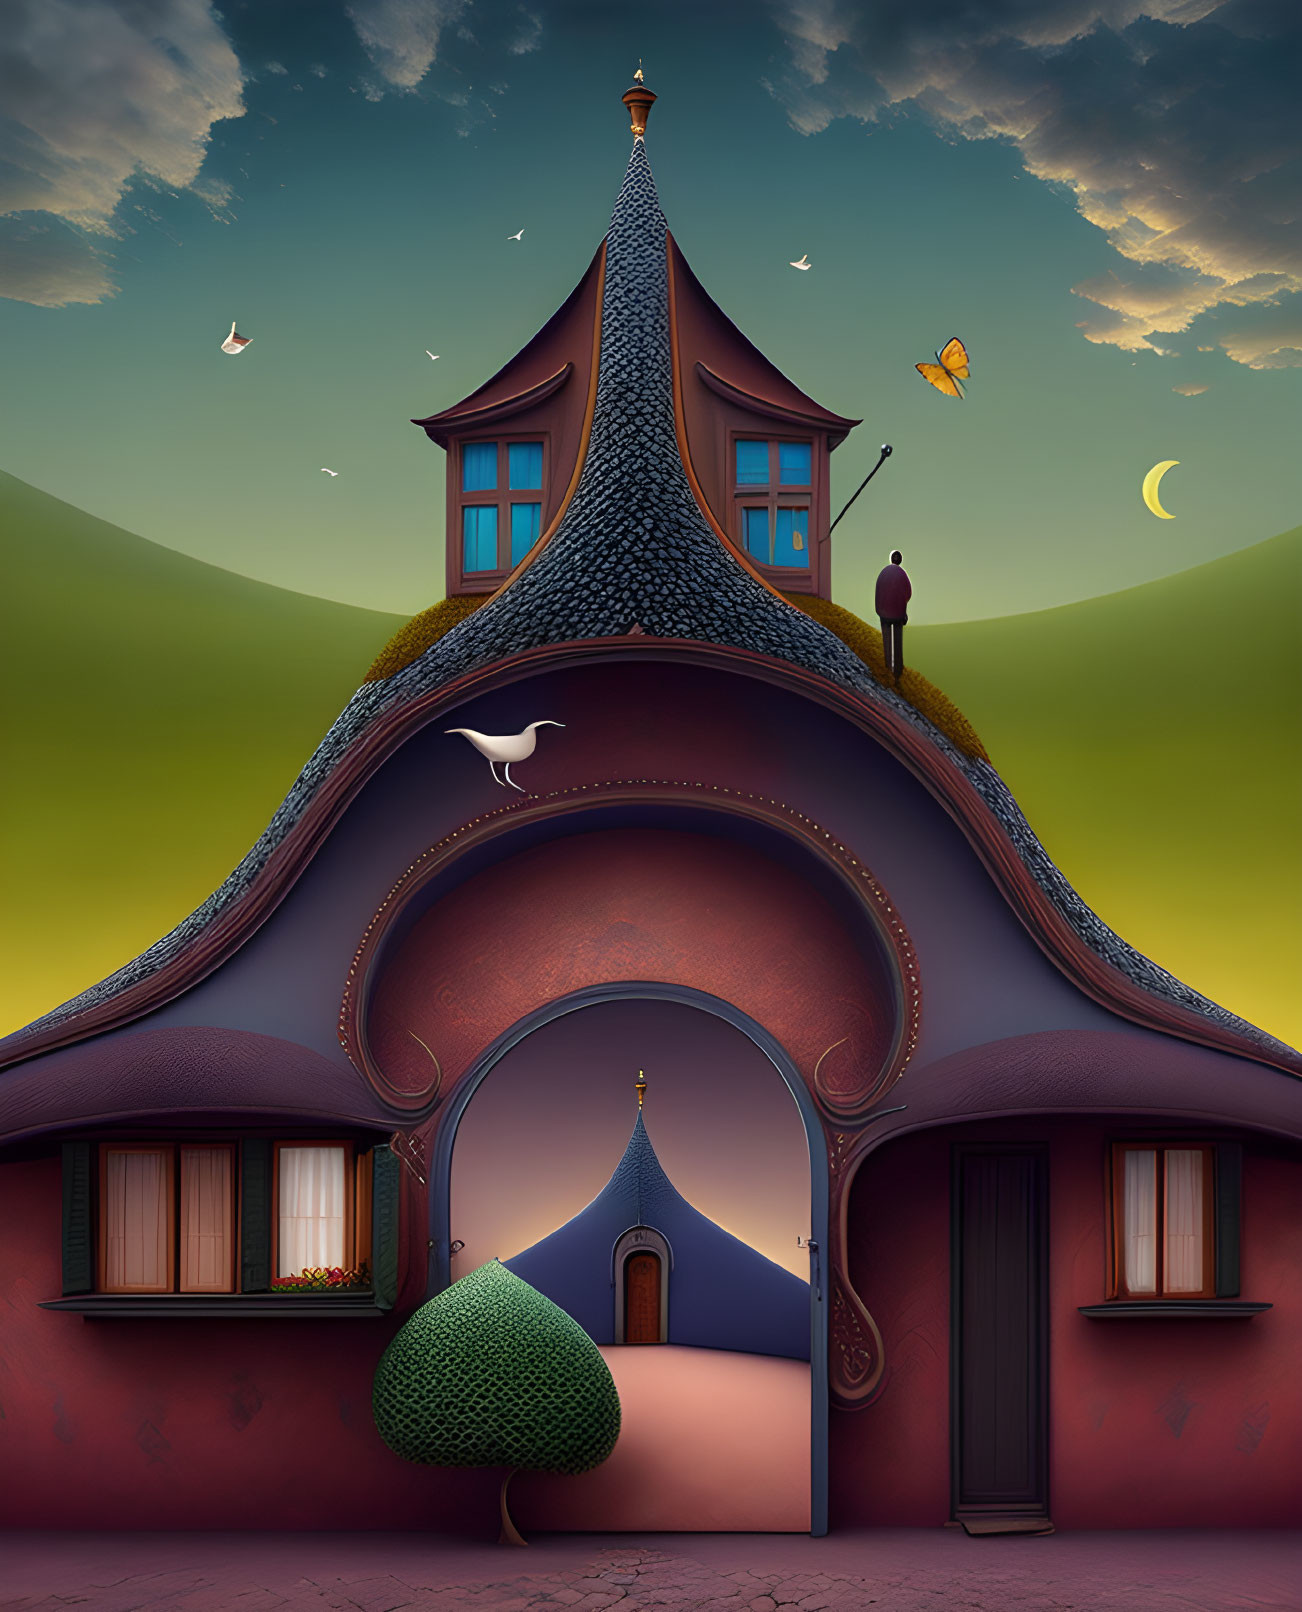 Stylized house illustration with curved roofs and towers at twilight